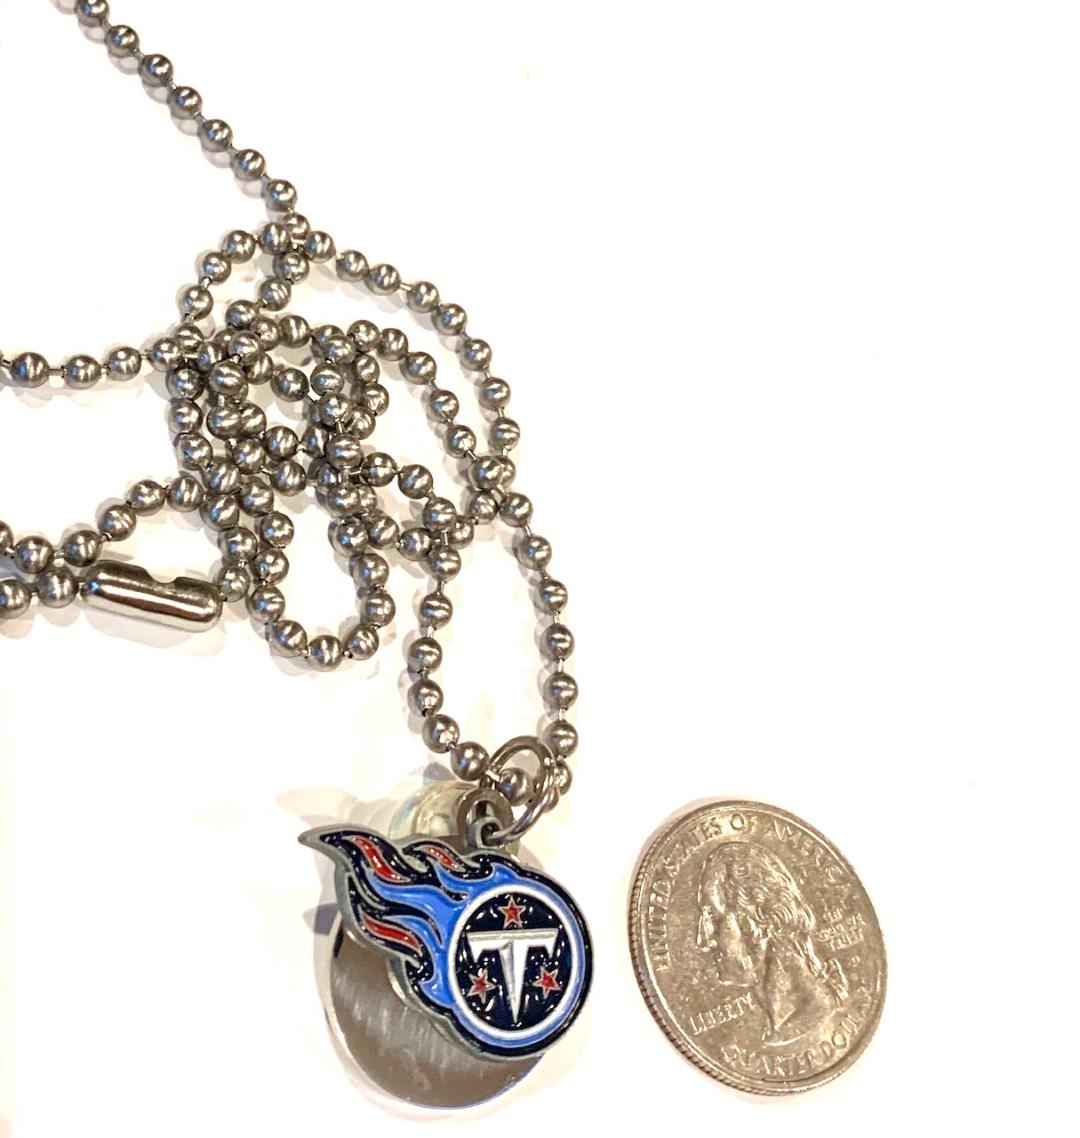 Tennesee Titans round small NFL stainless steel dog tag necklace ball chain pendant - Samstagsandmore